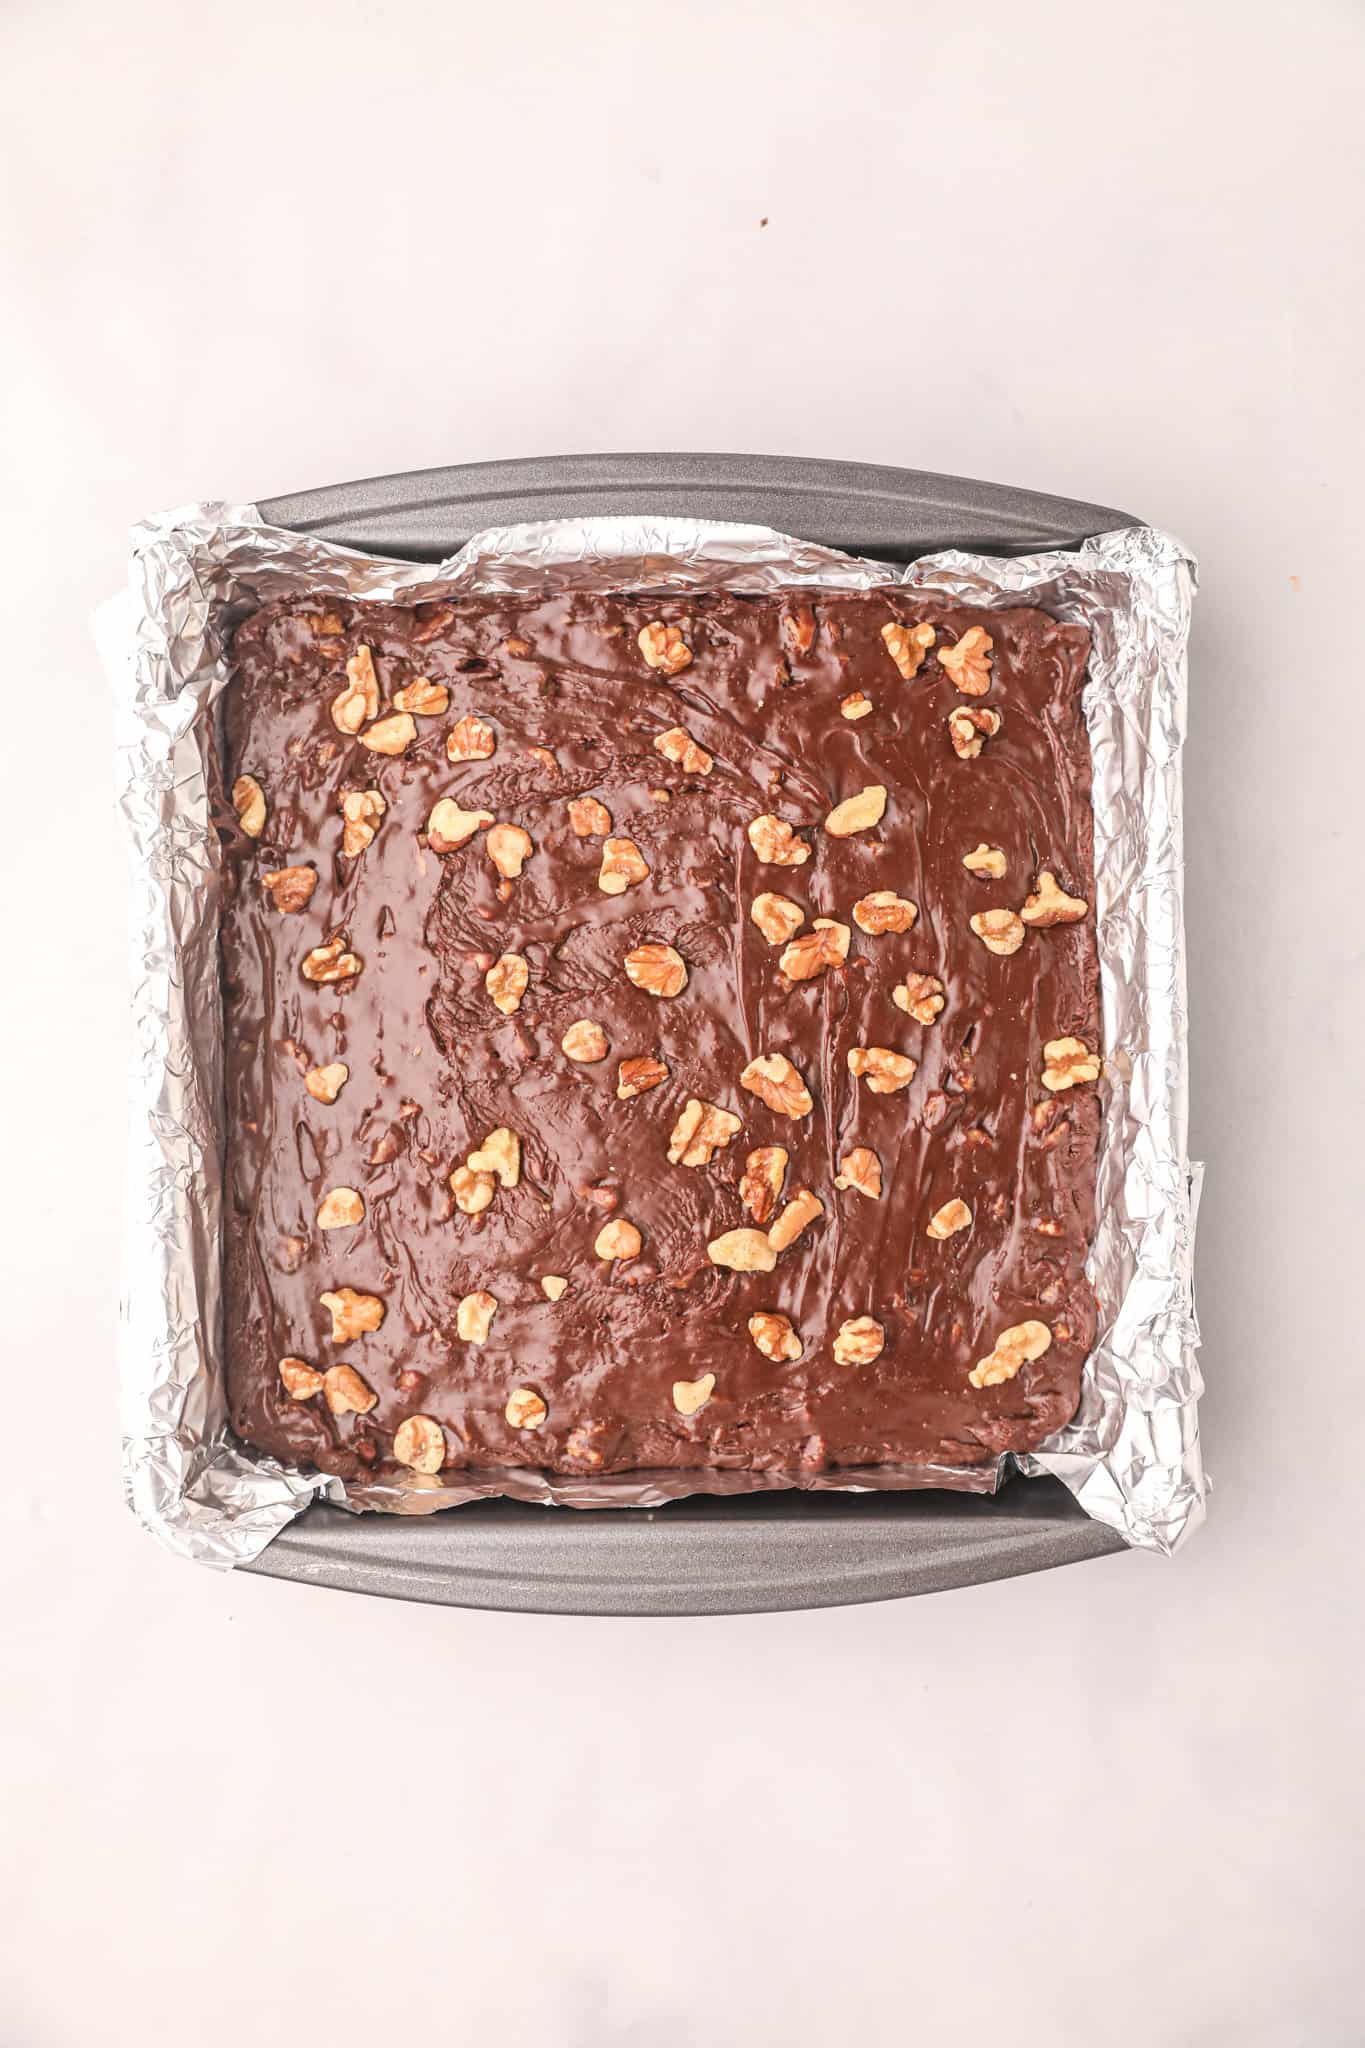 chopped walnuts sprinkled on top of chocolate fudge mixture in a foil lined pan